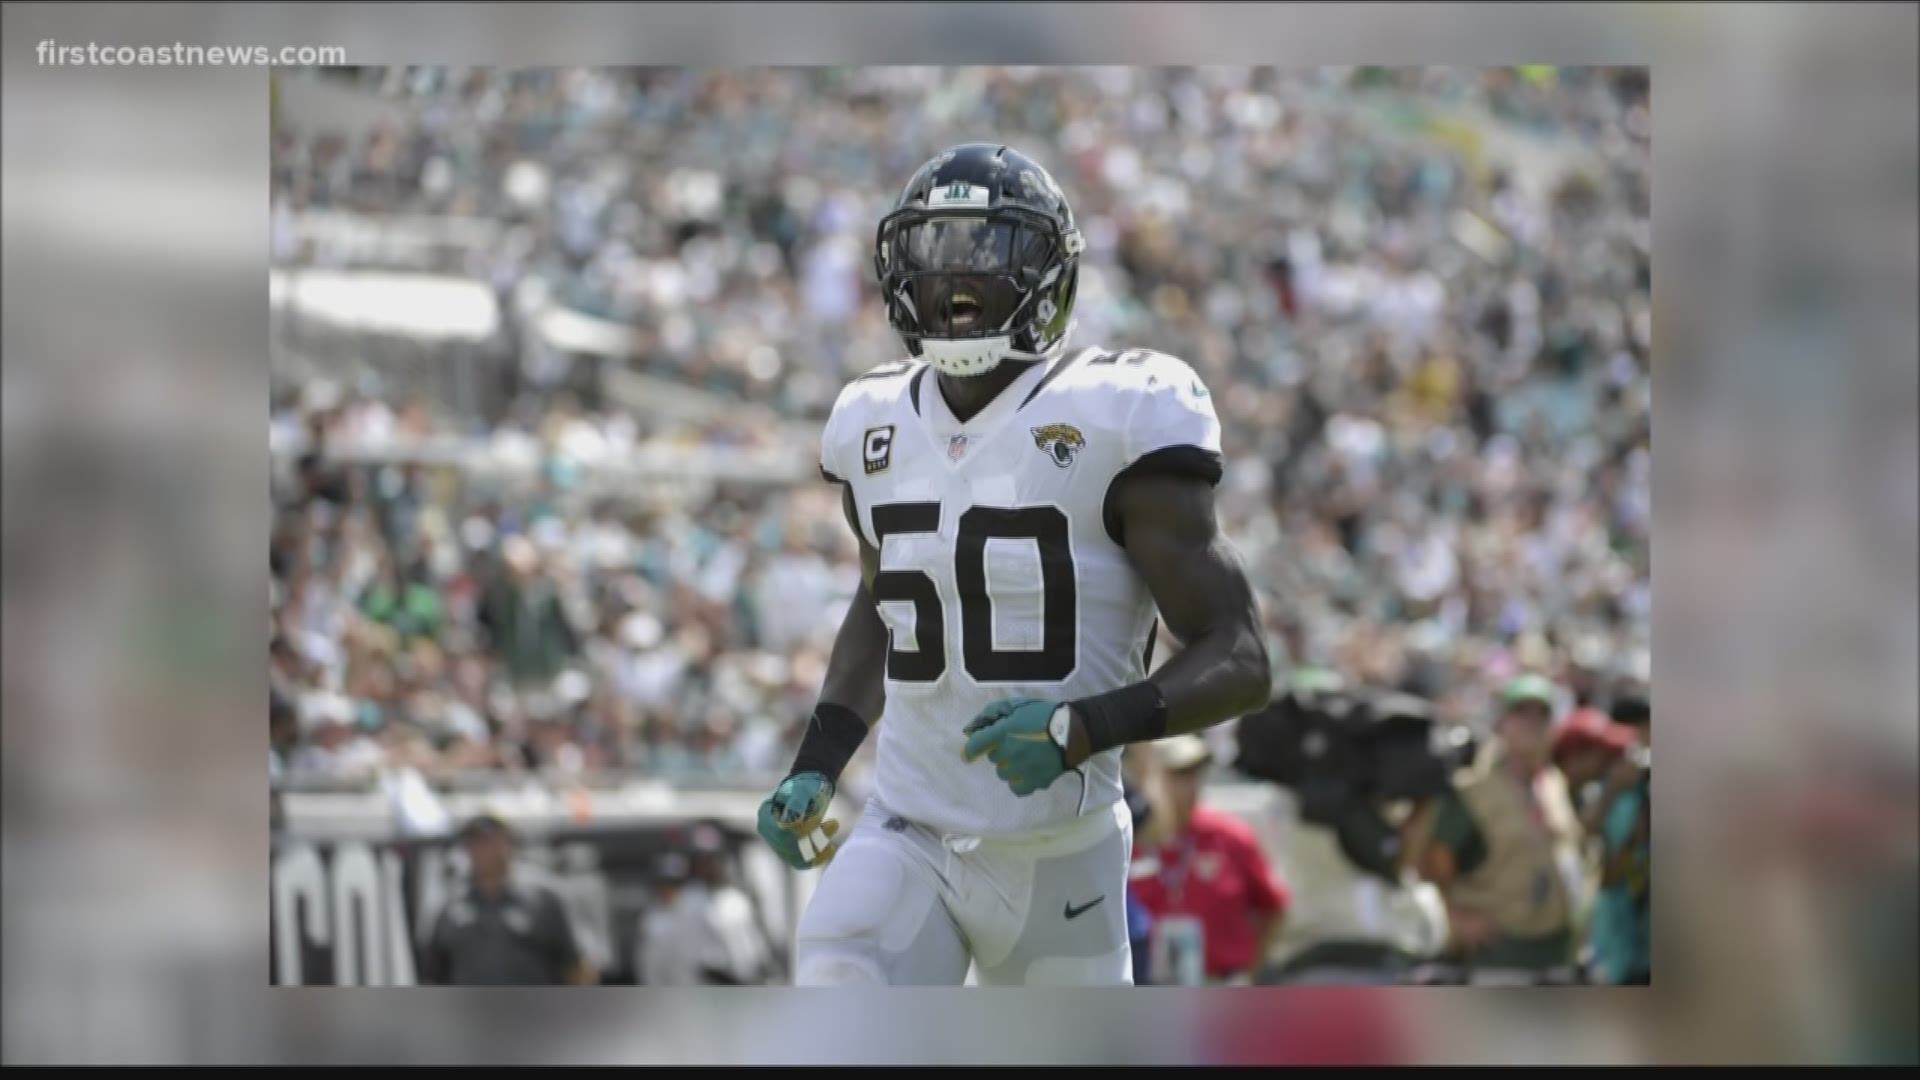 A defense attorney believes ex-Jacksonville Jaguars player Telvin Smith could be cooperating with police in an active criminal investigation.